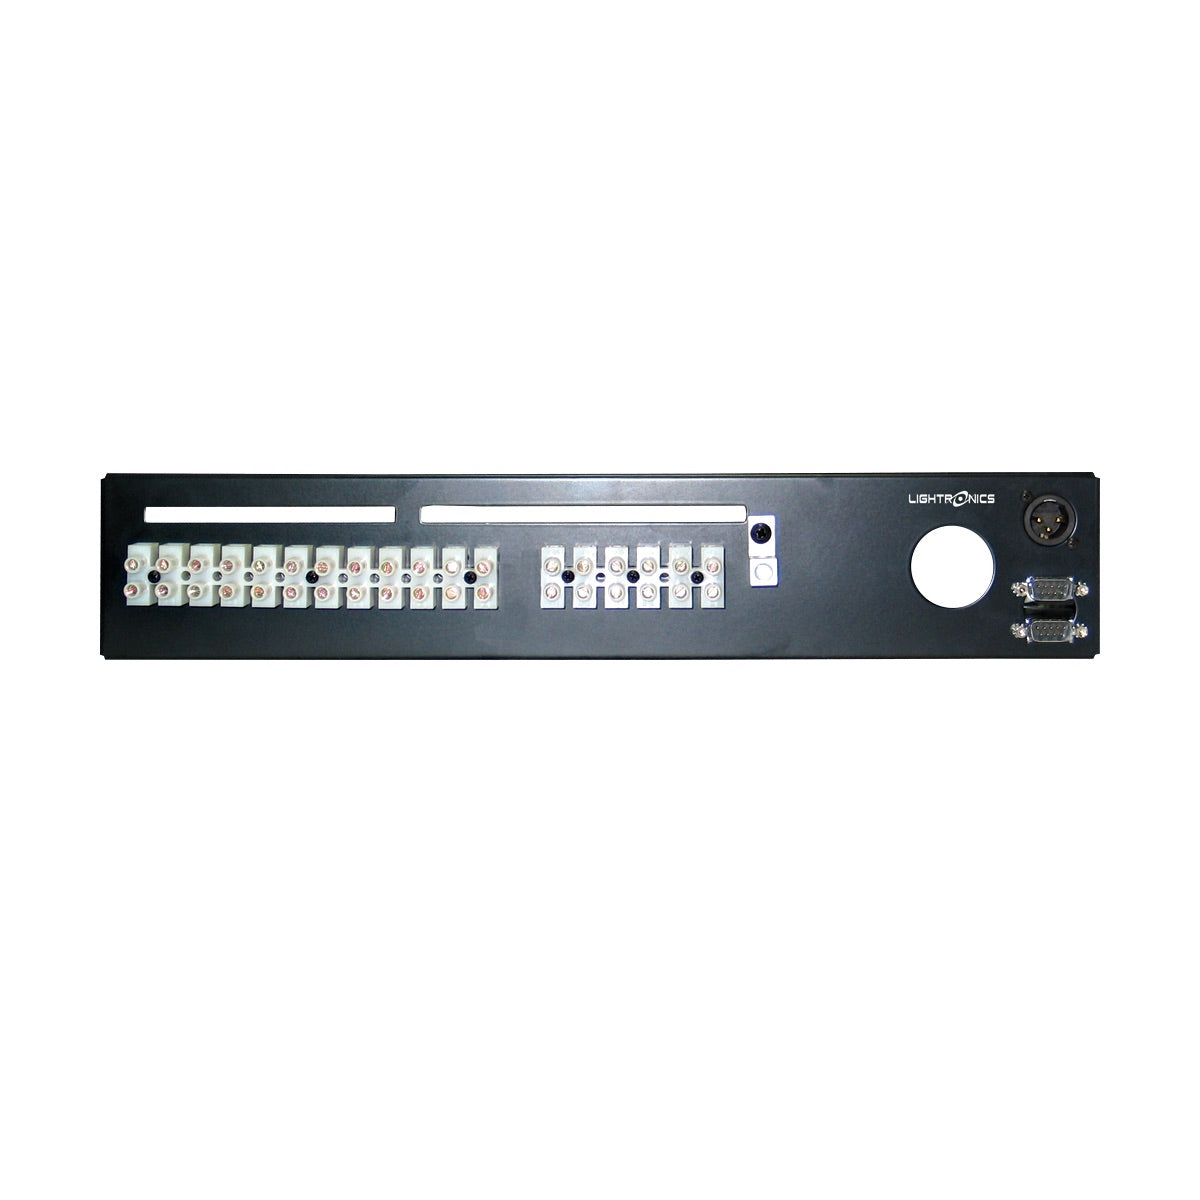 Lightronics RD122 Rack Mount Dimmer, RD Series, rear Terminal/Barrier Connector Strip with Knockout Cover